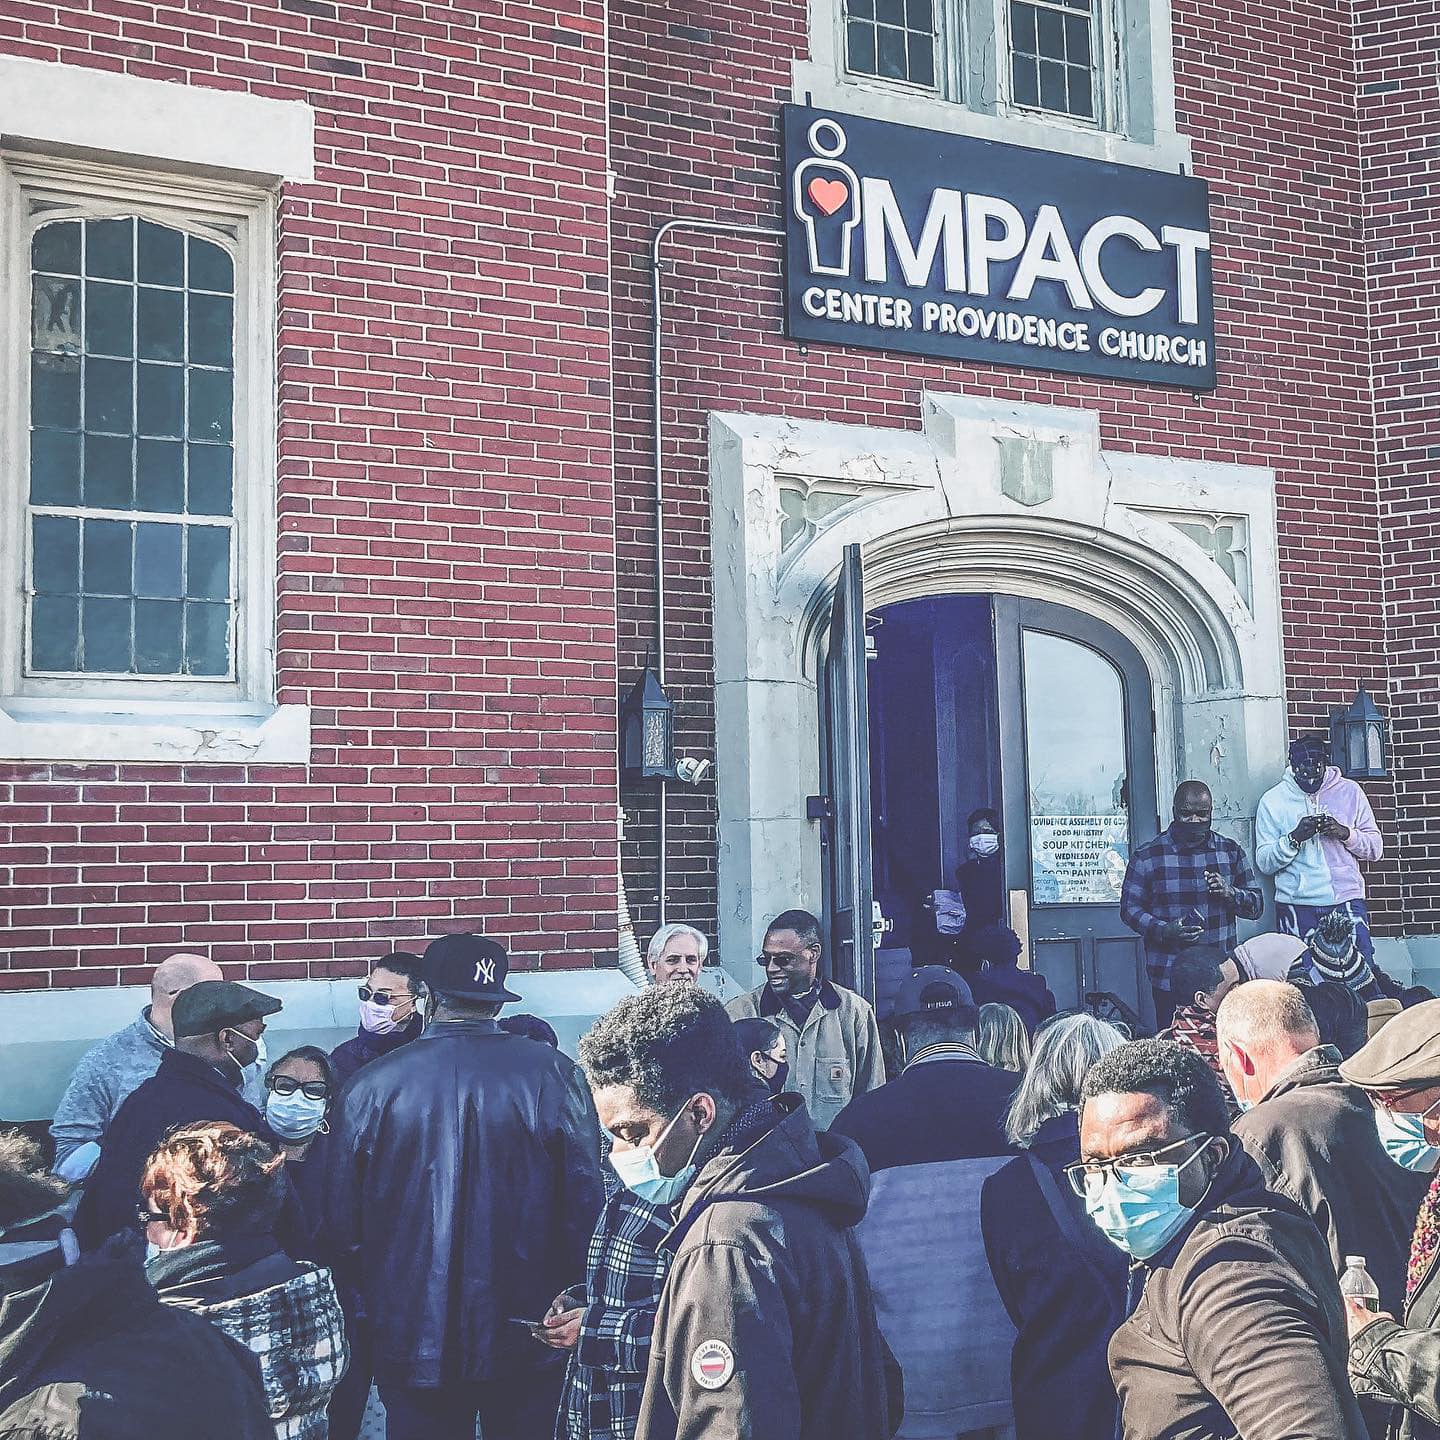 IMPACT - Center Providence Church Food Pantry